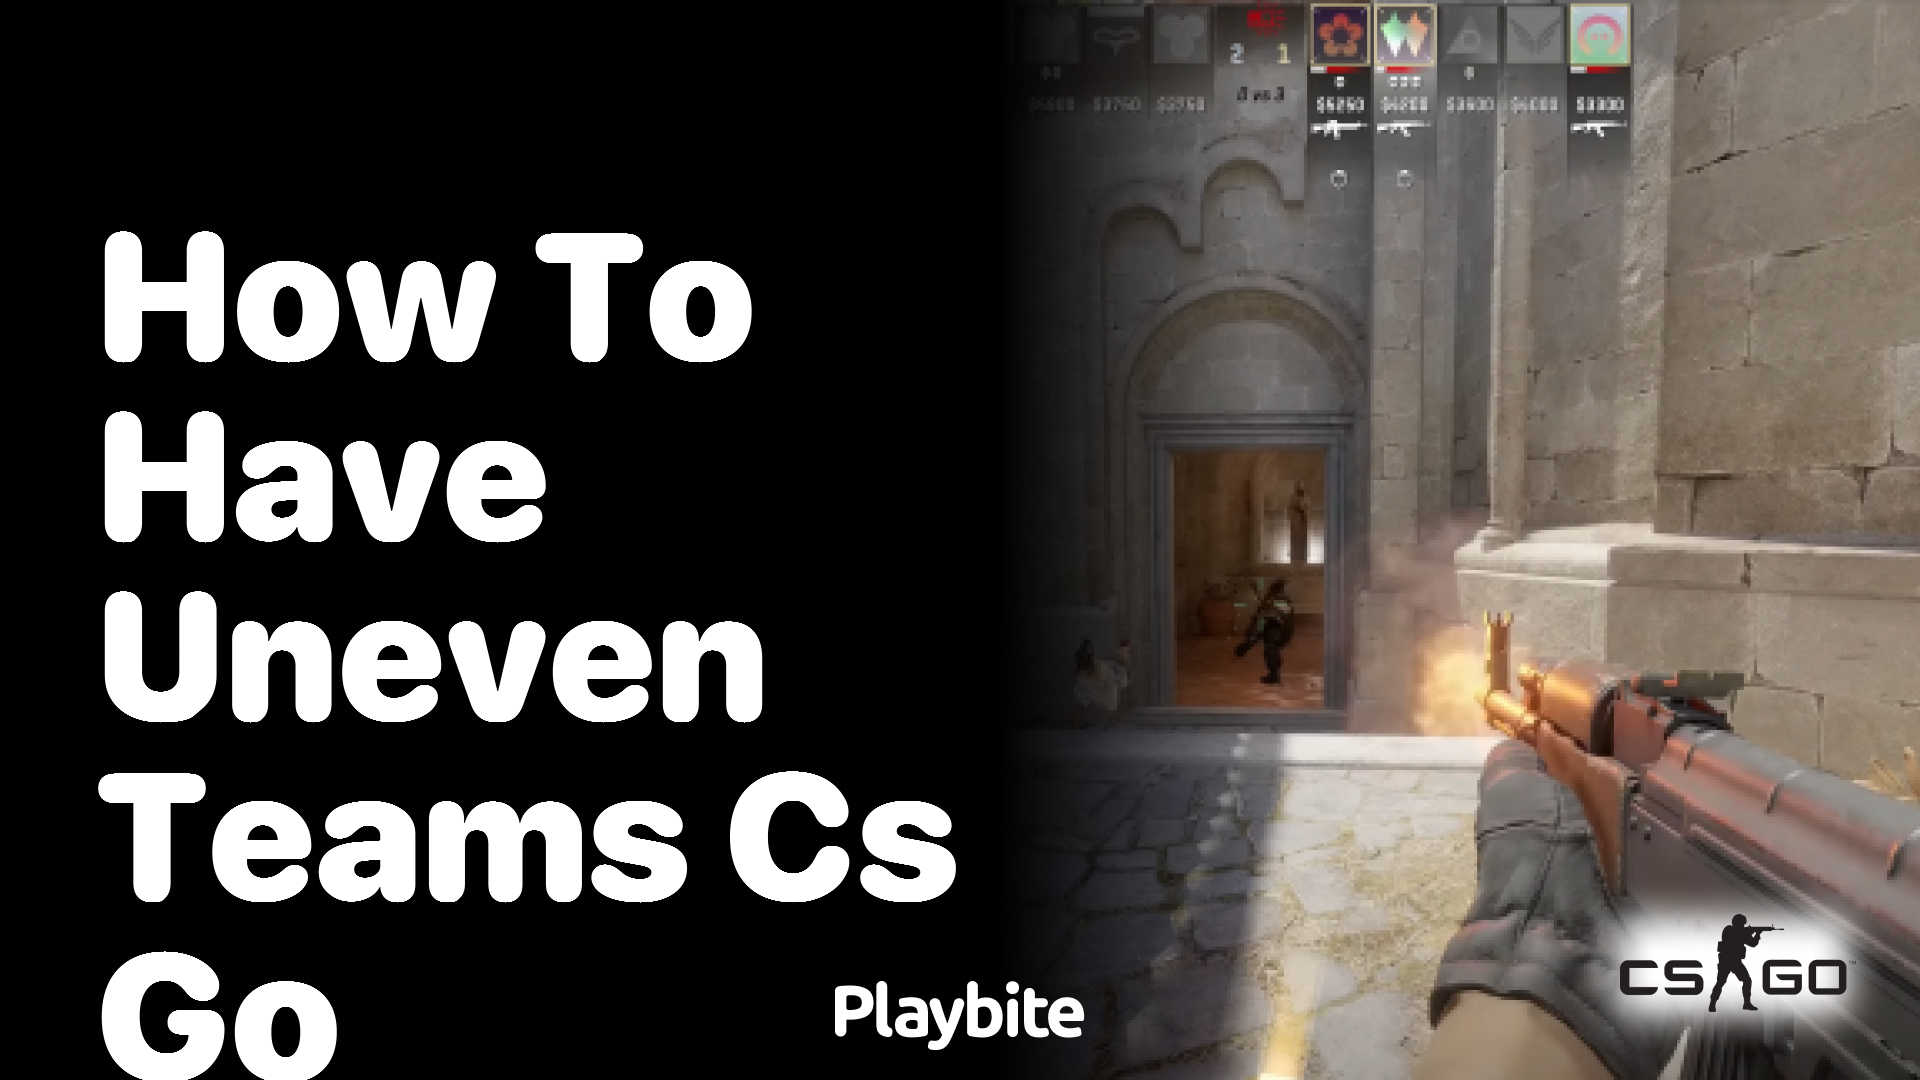 How to have uneven teams in CS:GO?